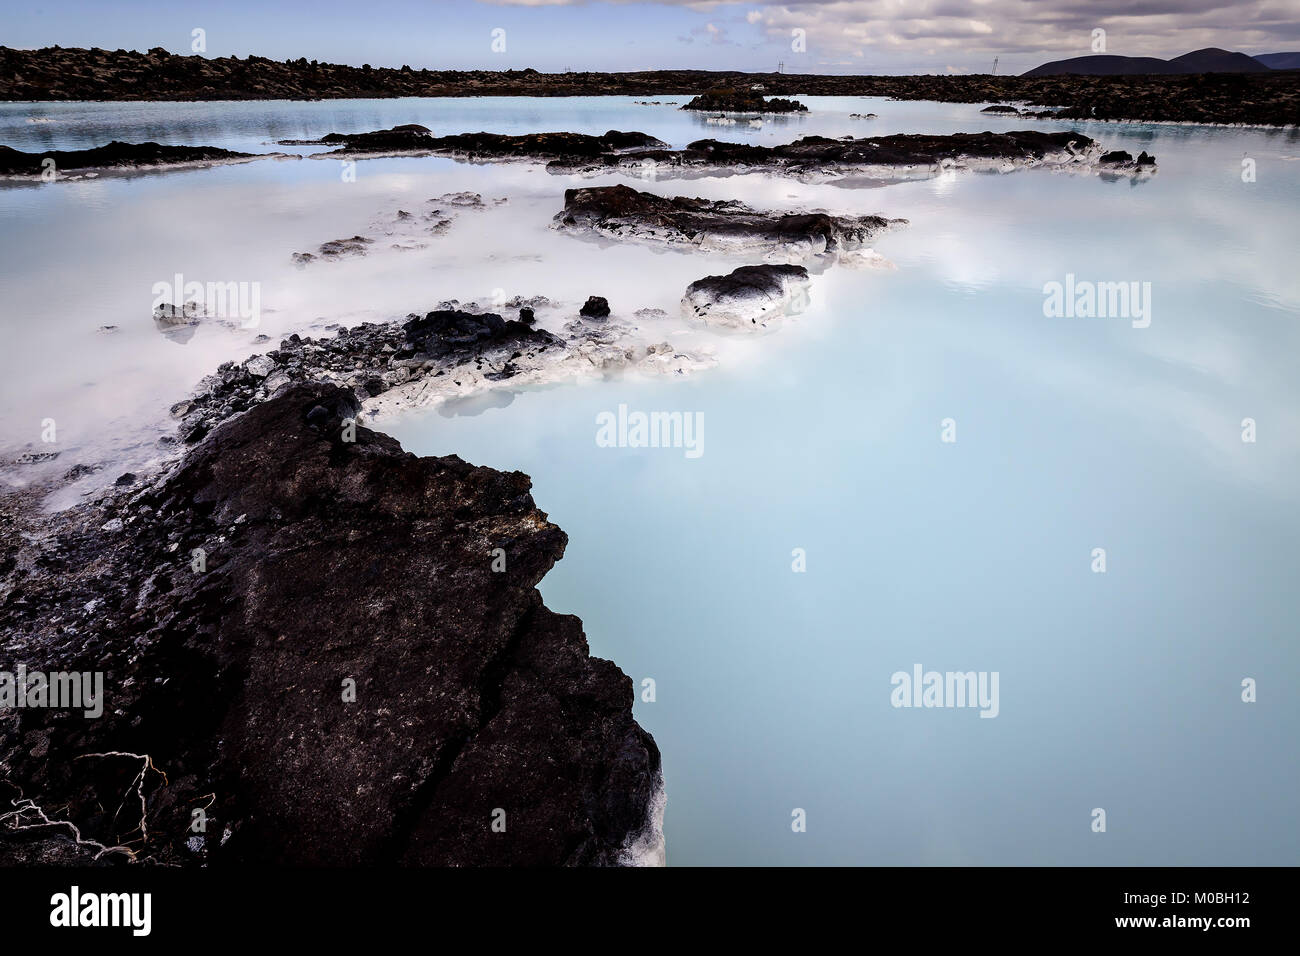 Blue Lagoon geothermal spa is one of the most visited attractions in Iceland. Stock Photo